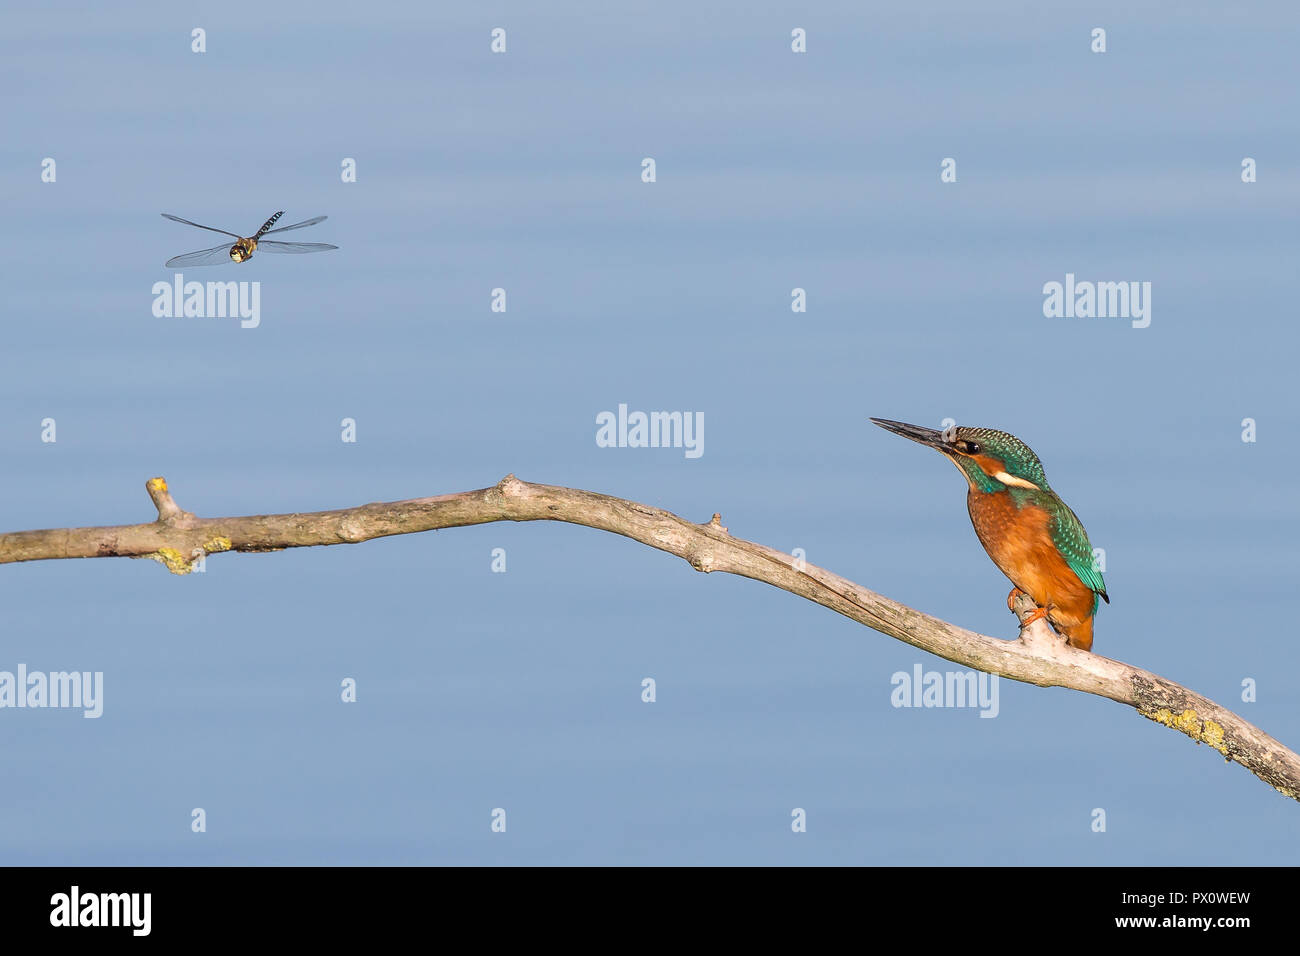 Comical side view of wild, hungry, UK kingfisher bird (Alcedo atthis) isolated perching on branch over water, staring at hovering dragonfly prey. Stock Photo